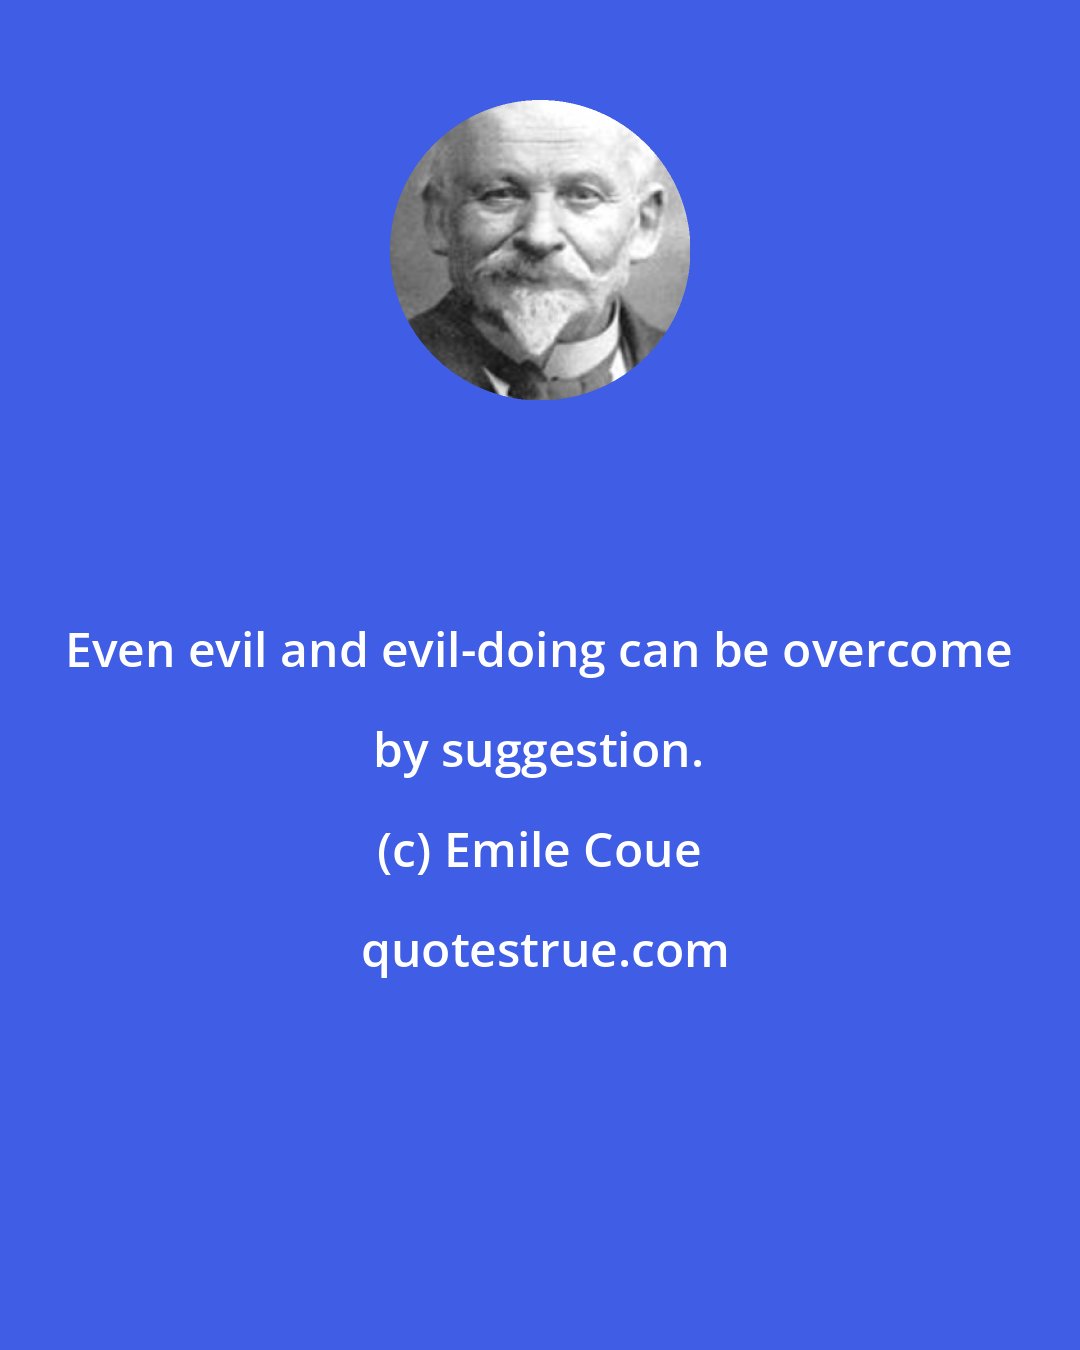 Emile Coue: Even evil and evil-doing can be overcome by suggestion.